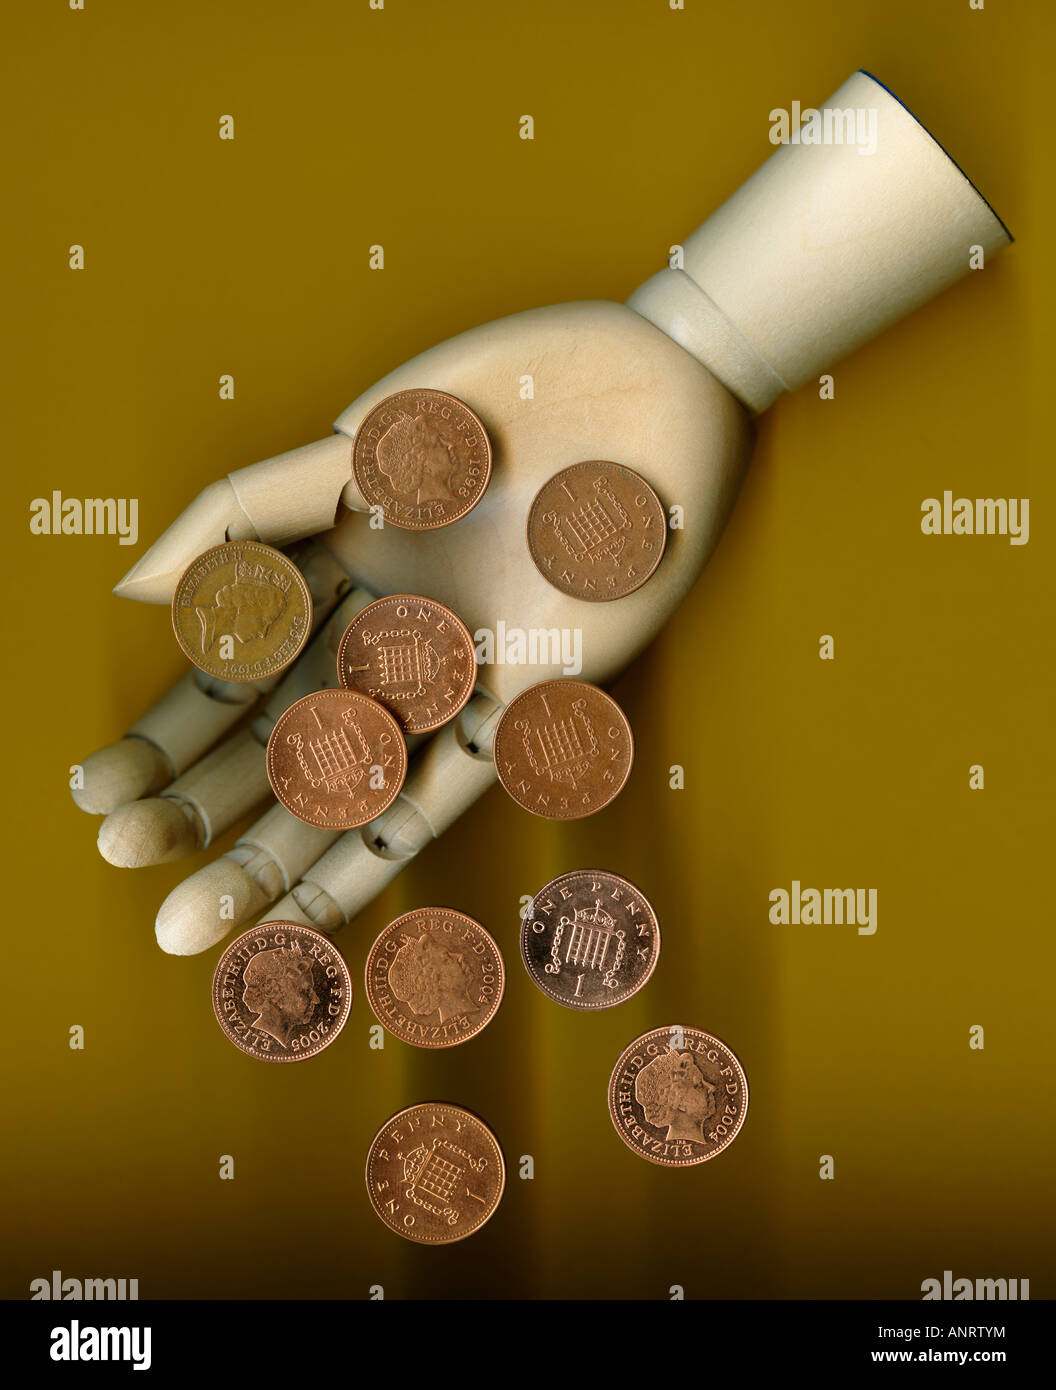 One penny coins fall from wooden hand, close-up Stock Photo